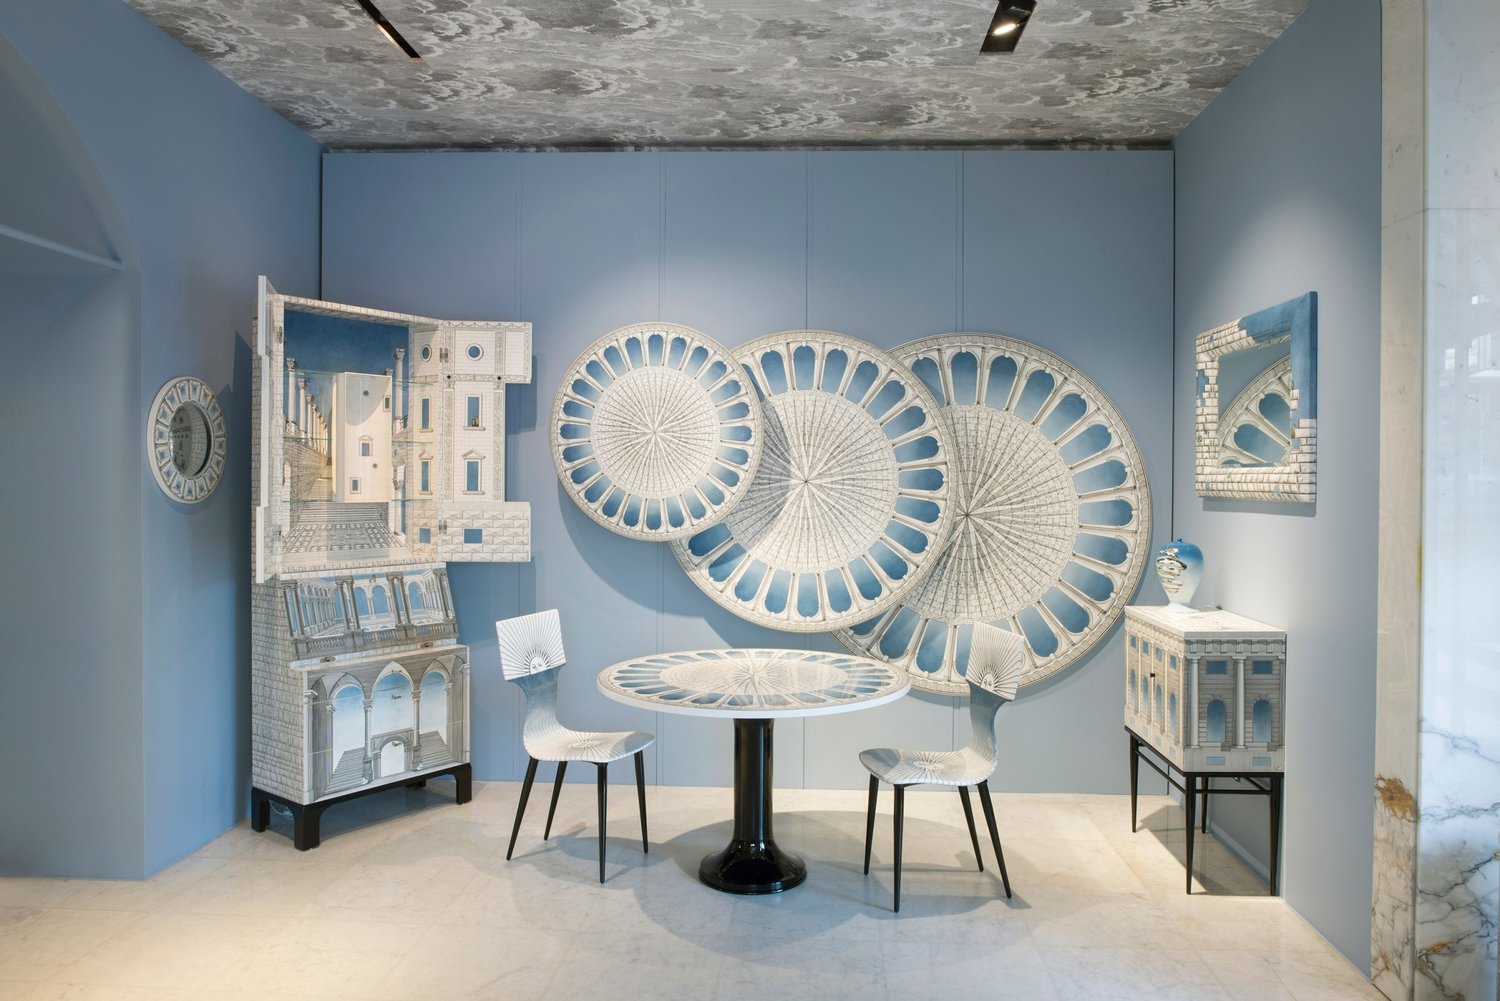 The history behind the Fornasetti Sole chair - Homes and Antiques